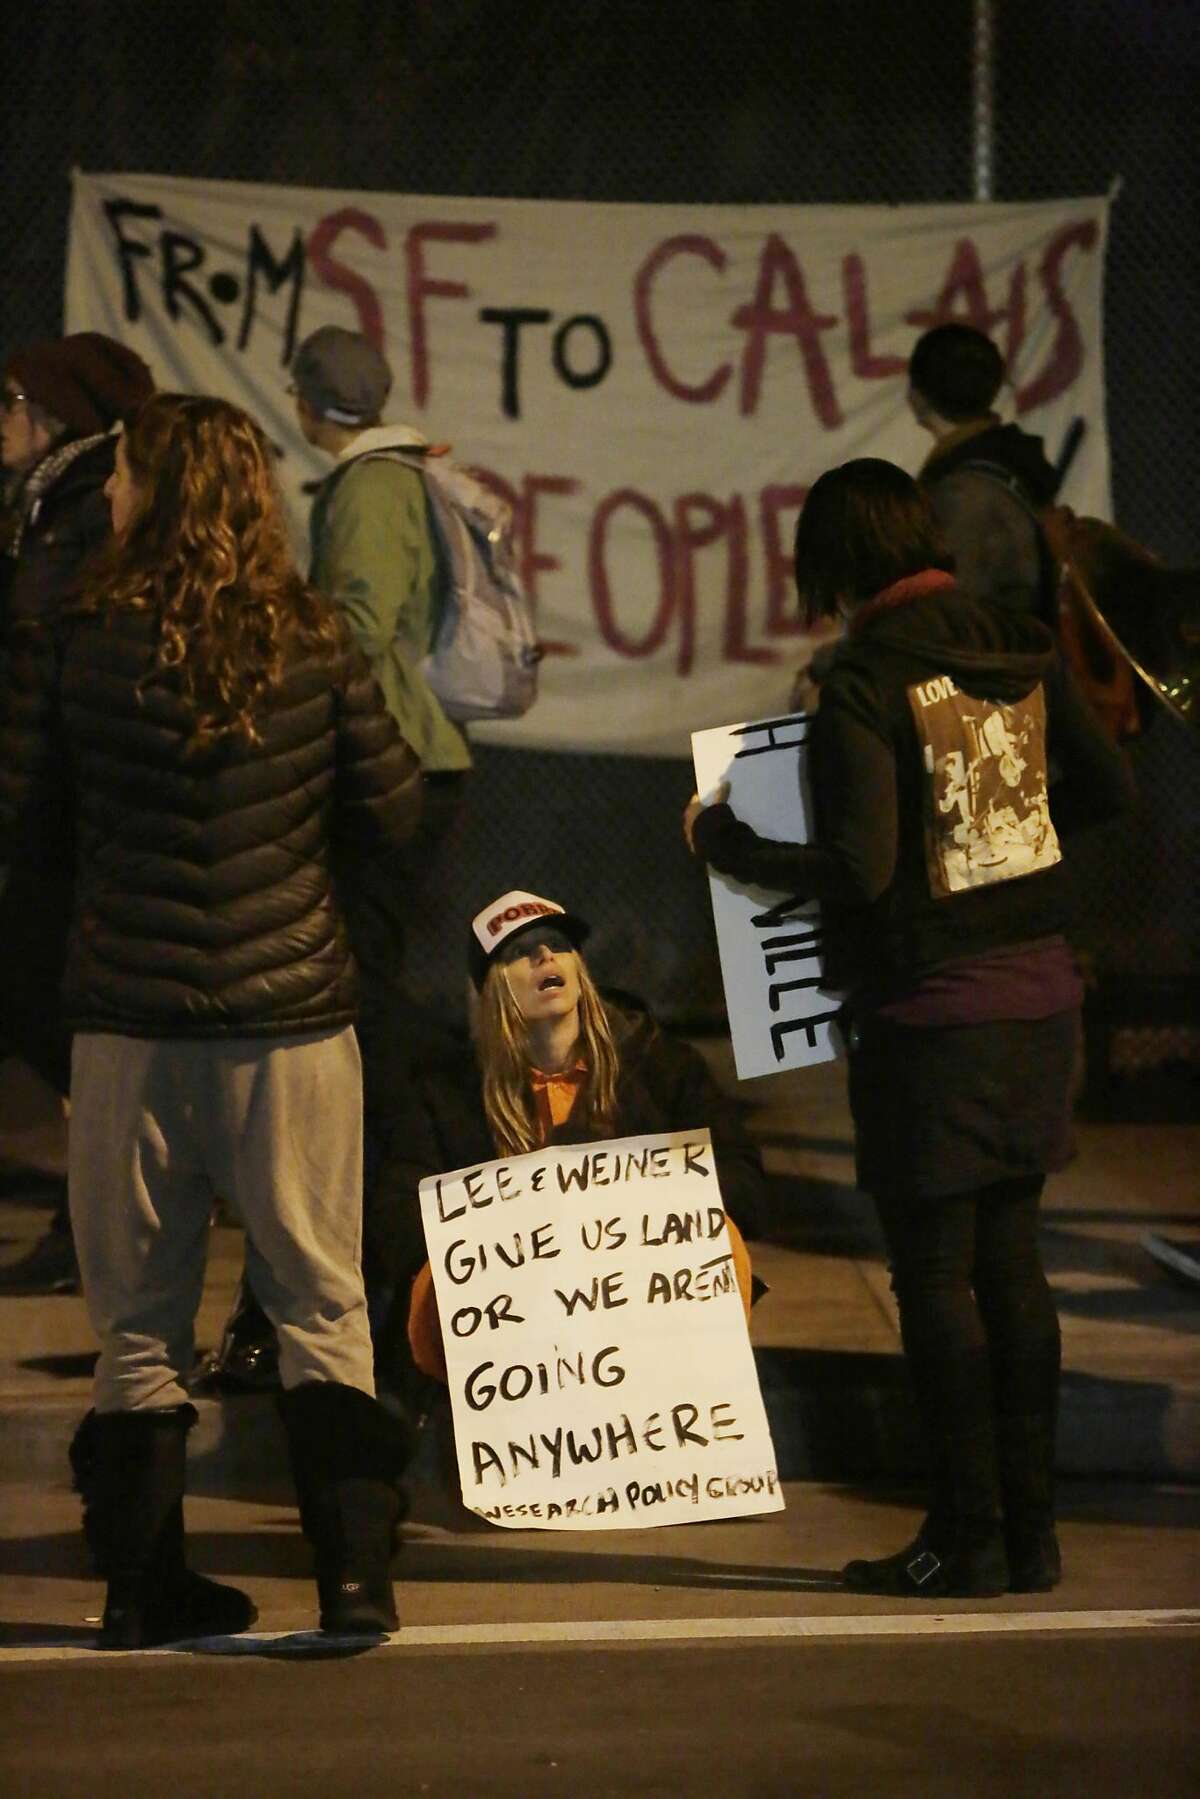 Homeless supporters hold signs along 13th Street during a vigil in the early morning on Friday, February 26, 2016 in San Francisco, California.